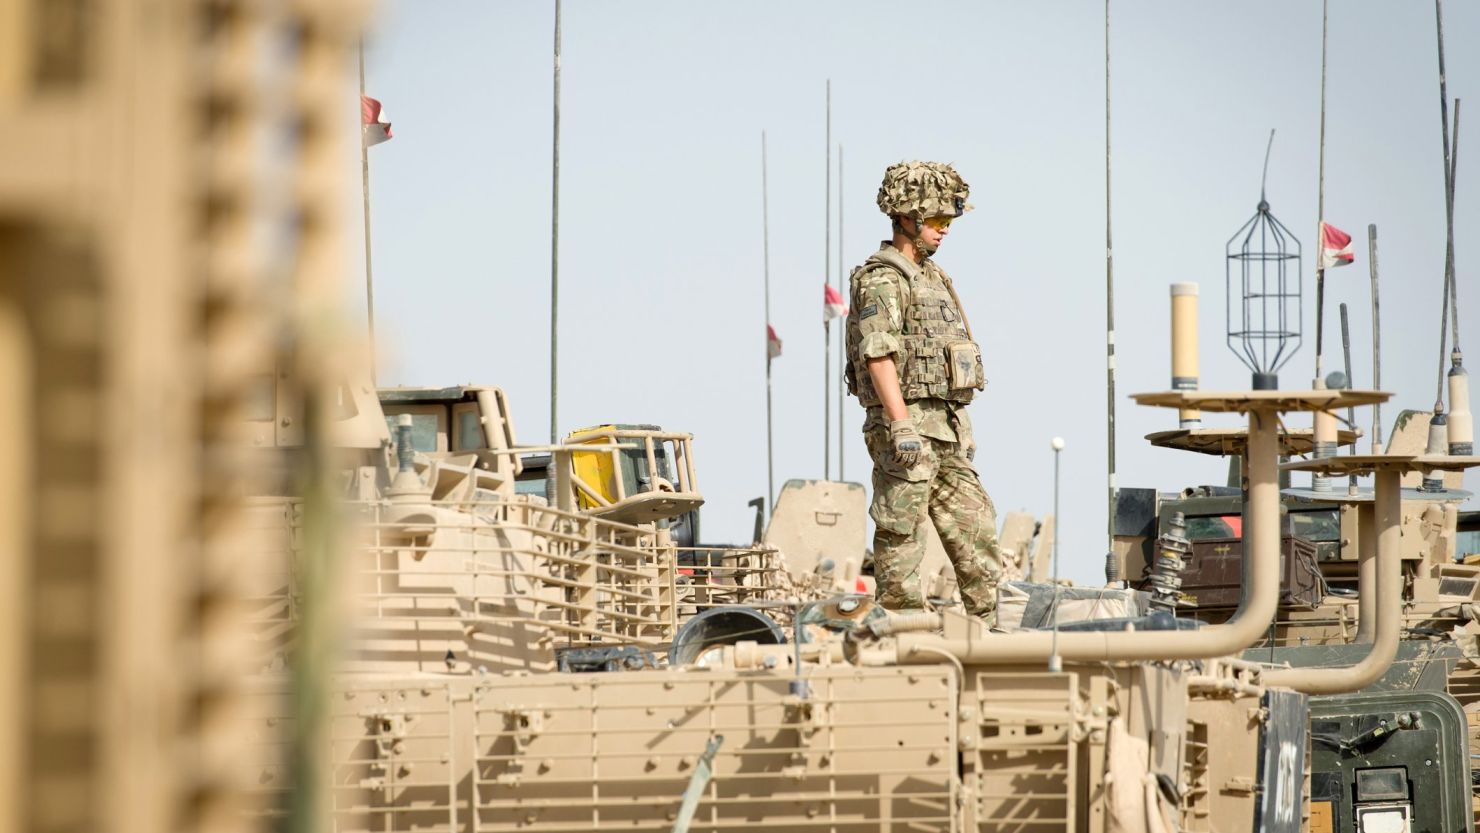 A British soldier stands on top of an armoured vehicle as UK PM David Cameron visits Camp Bastion on June 29, 2013.